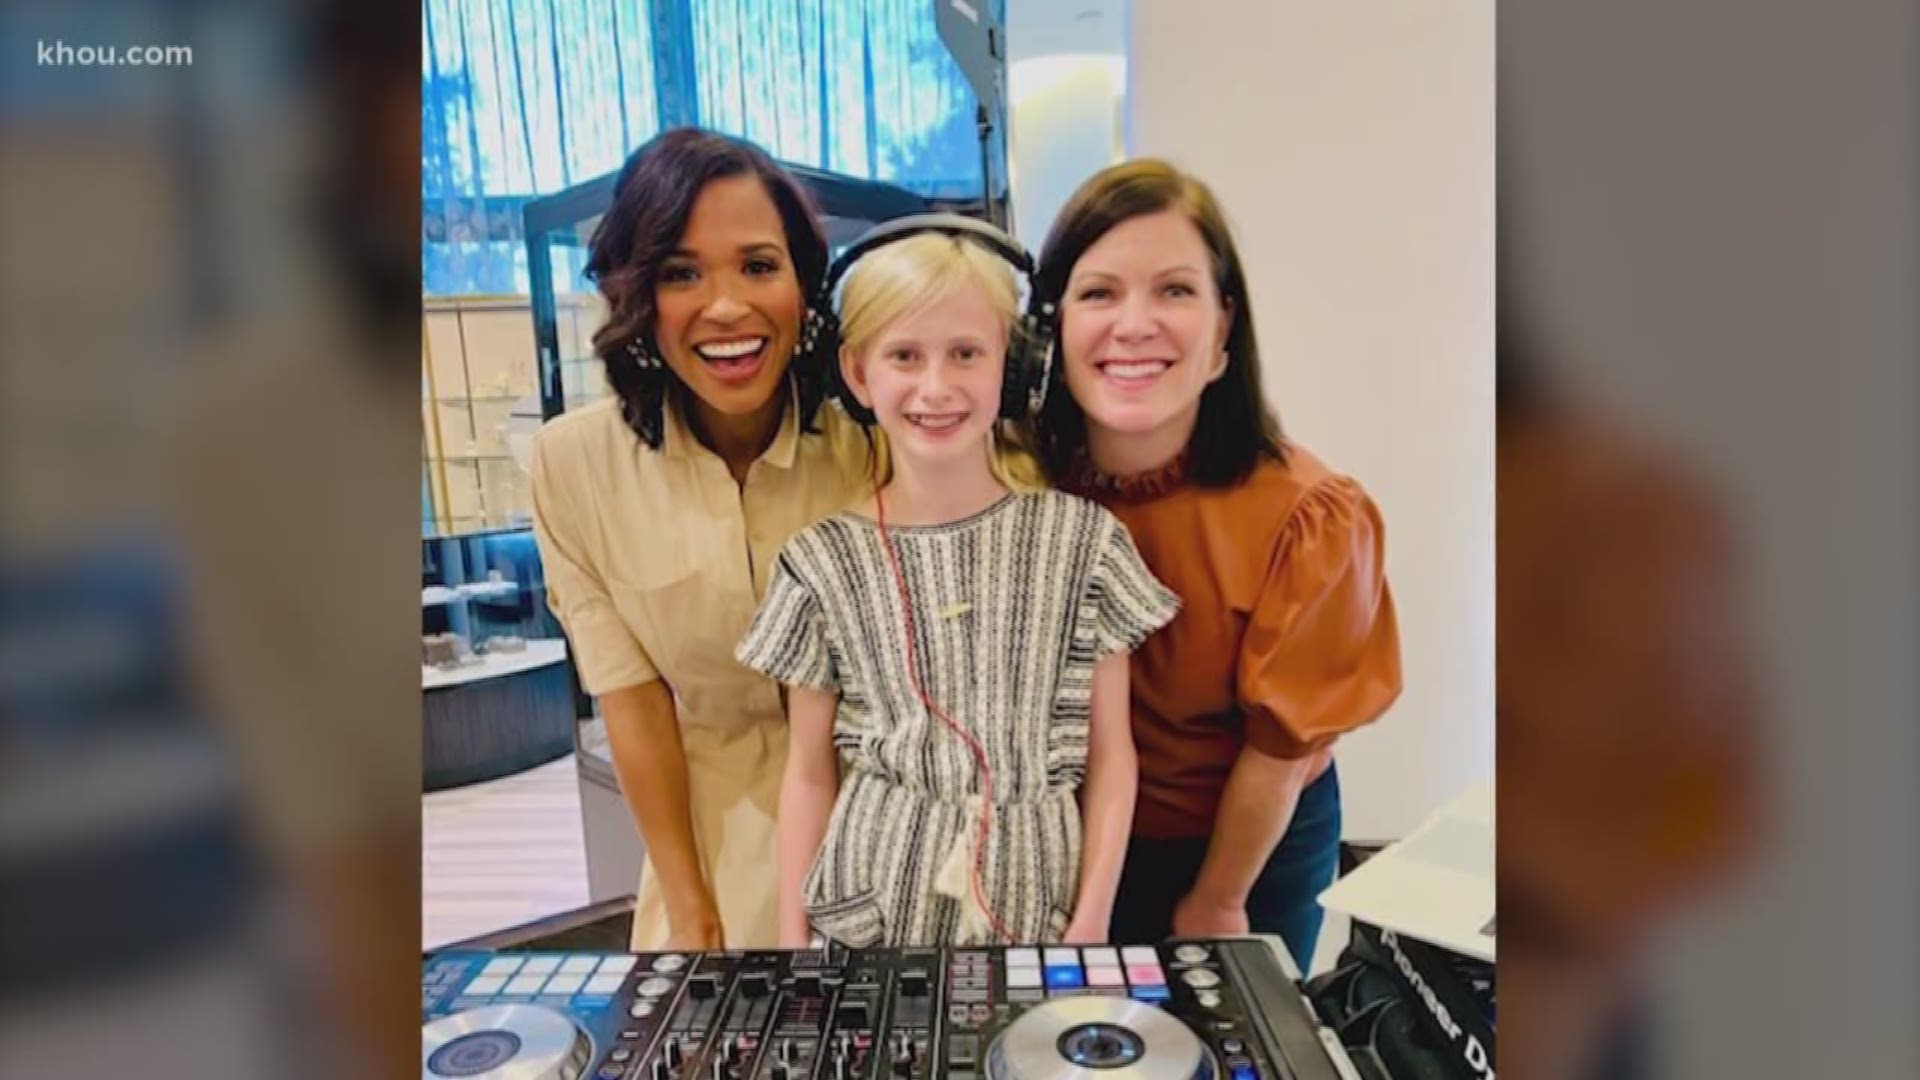 DJ Senega is mentoring DJ Maddy Rose, a young girl taking Houston by storm with her talent.